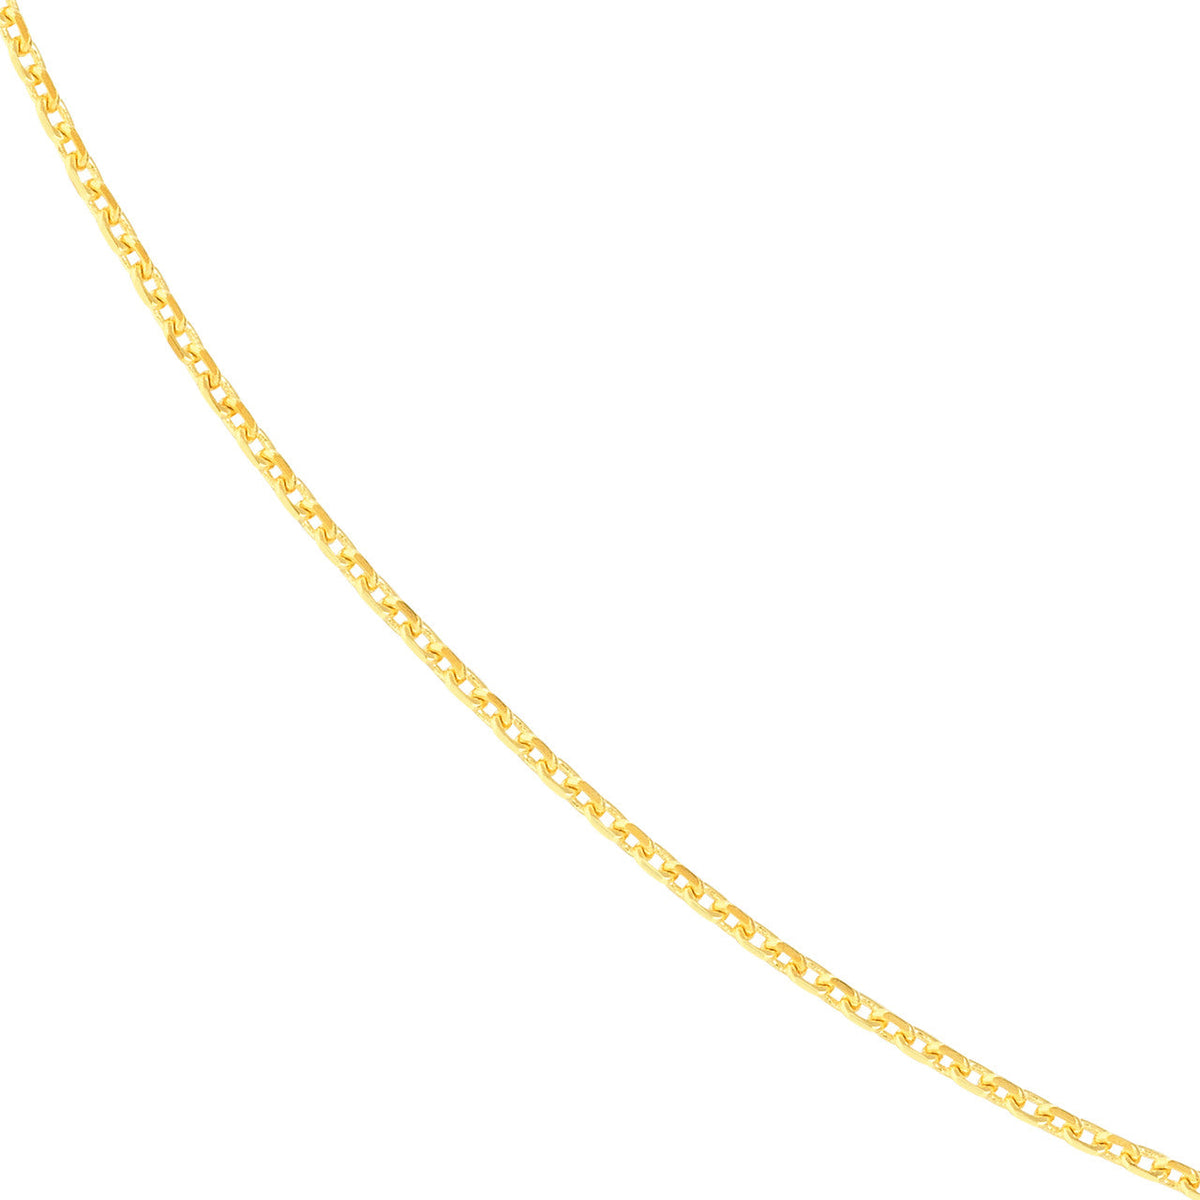 14K Yellow Gold Or White Gold 0.8mm D/C Cable Chain Necklace with Spring Ring